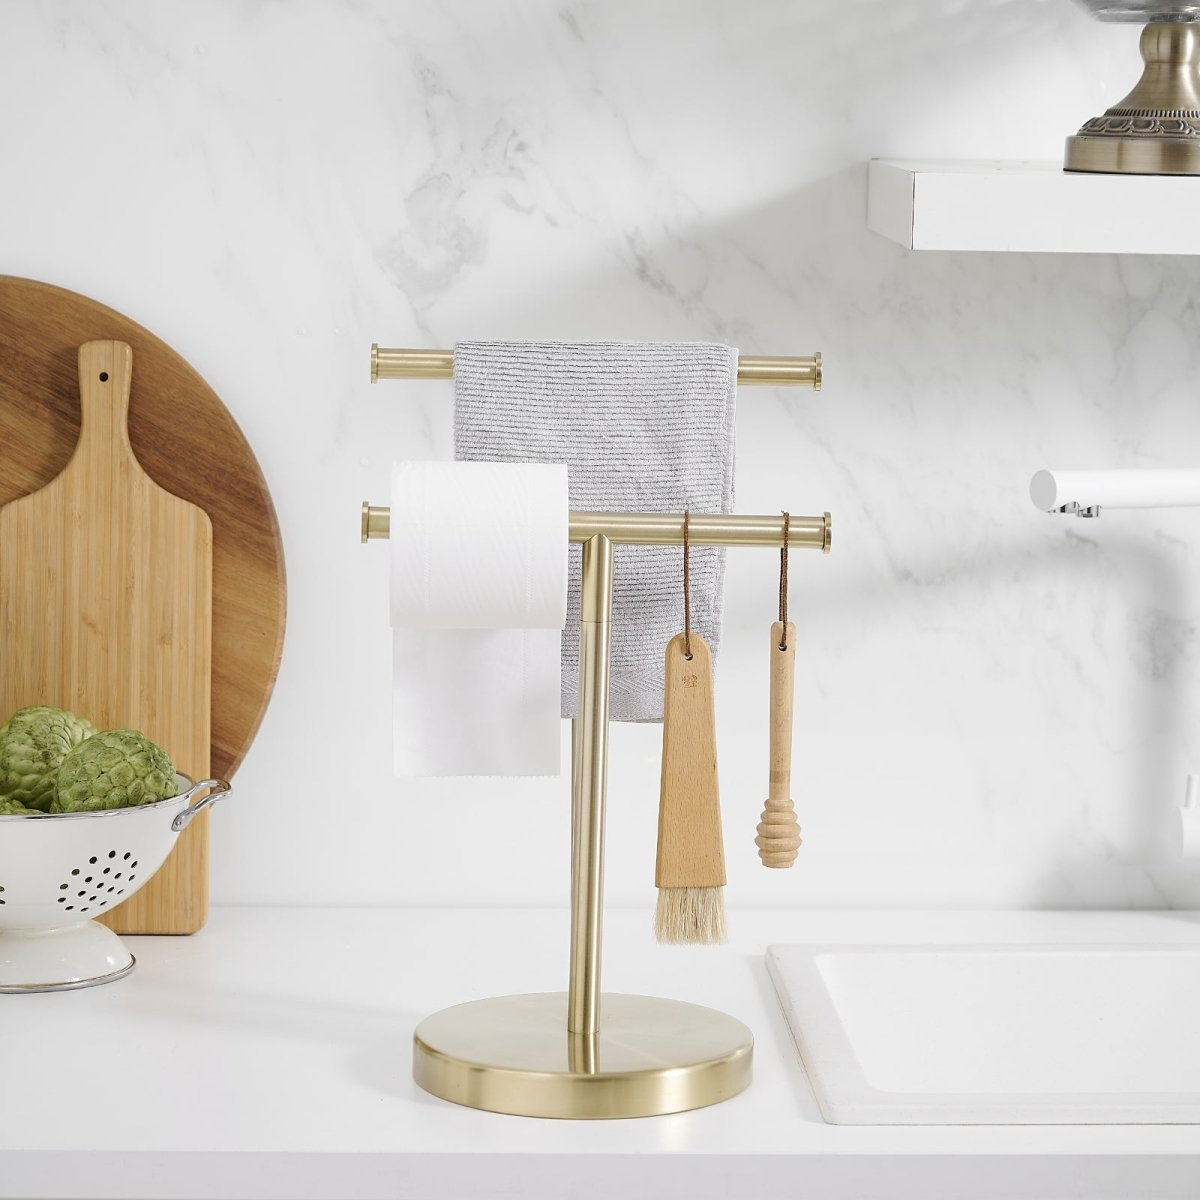 Freestanding Bathroom Toilet Paper Holder with Double T-Shape Gold - buyfaucet.com